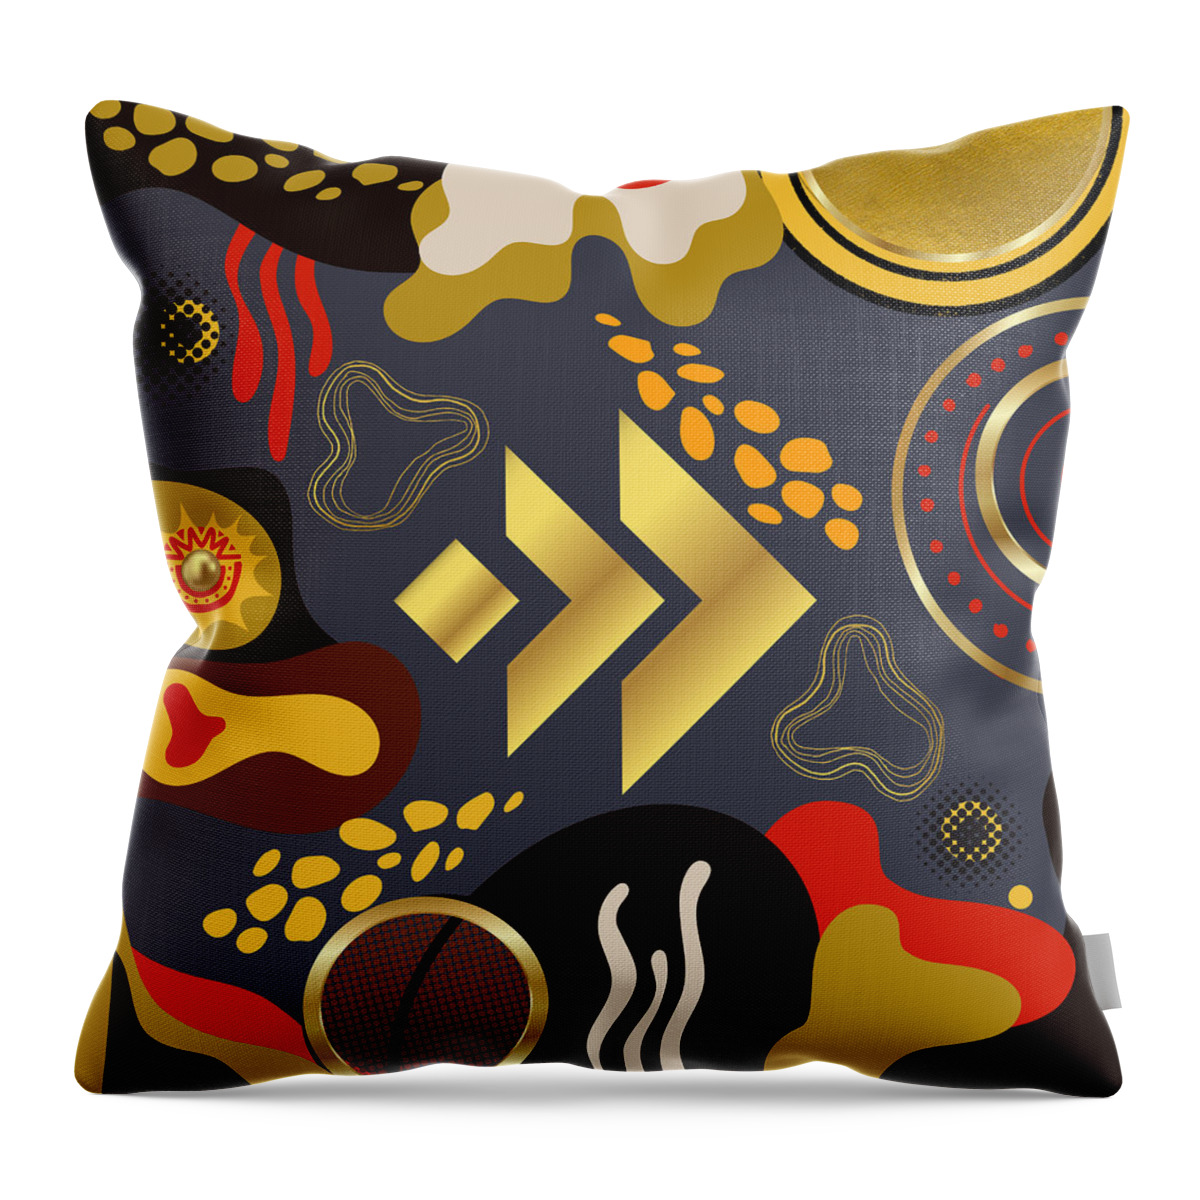 Contemporary Art Throw Pillow featuring the mixed media Belize by Canessa Thomas